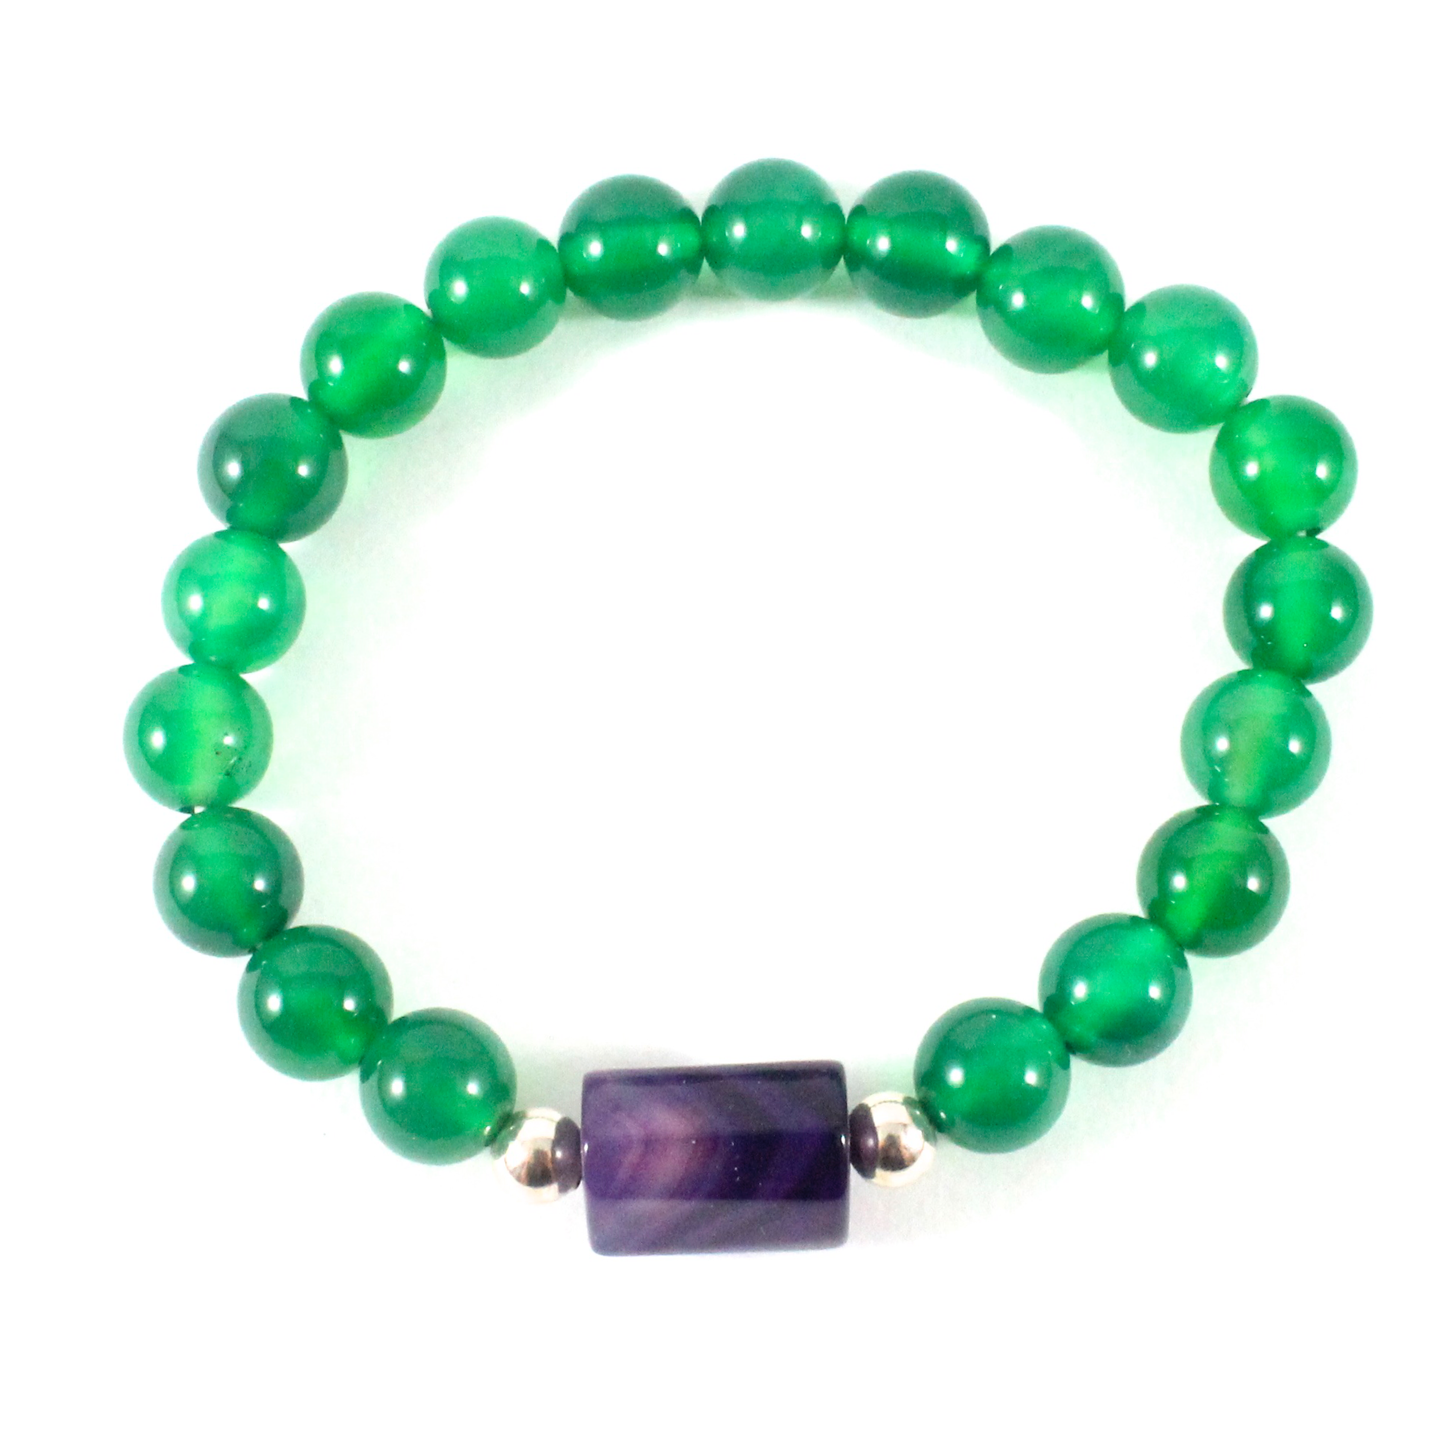 Green Agate w/ Amethyst Bracelet - Lotus Collection -The Ricci District